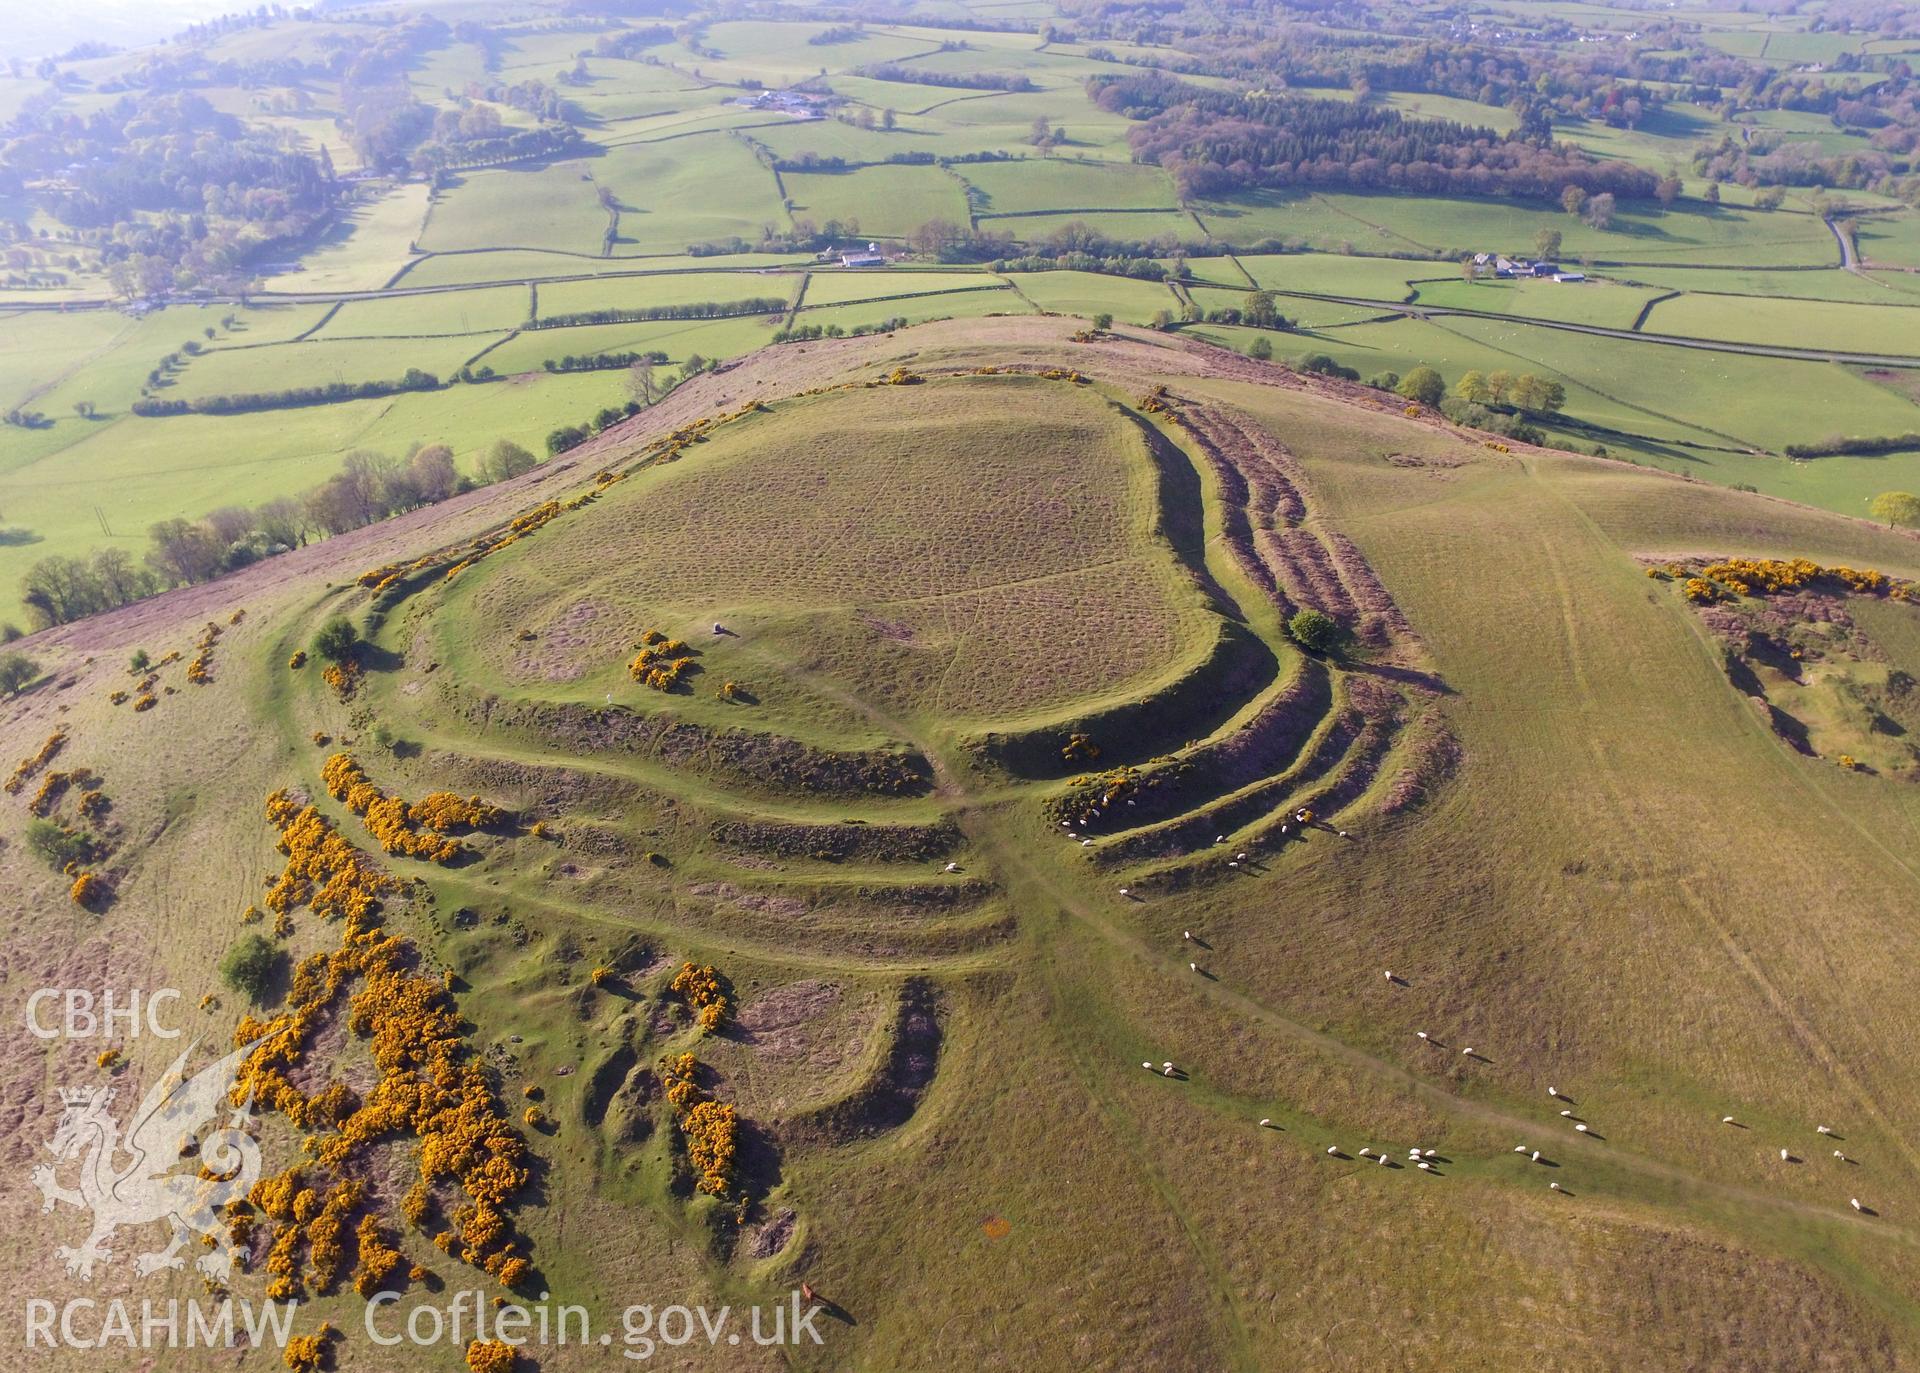 Colour photo showing Pen y Crug Hillfort, produced by Paul R. Davis,  7th May 2017.